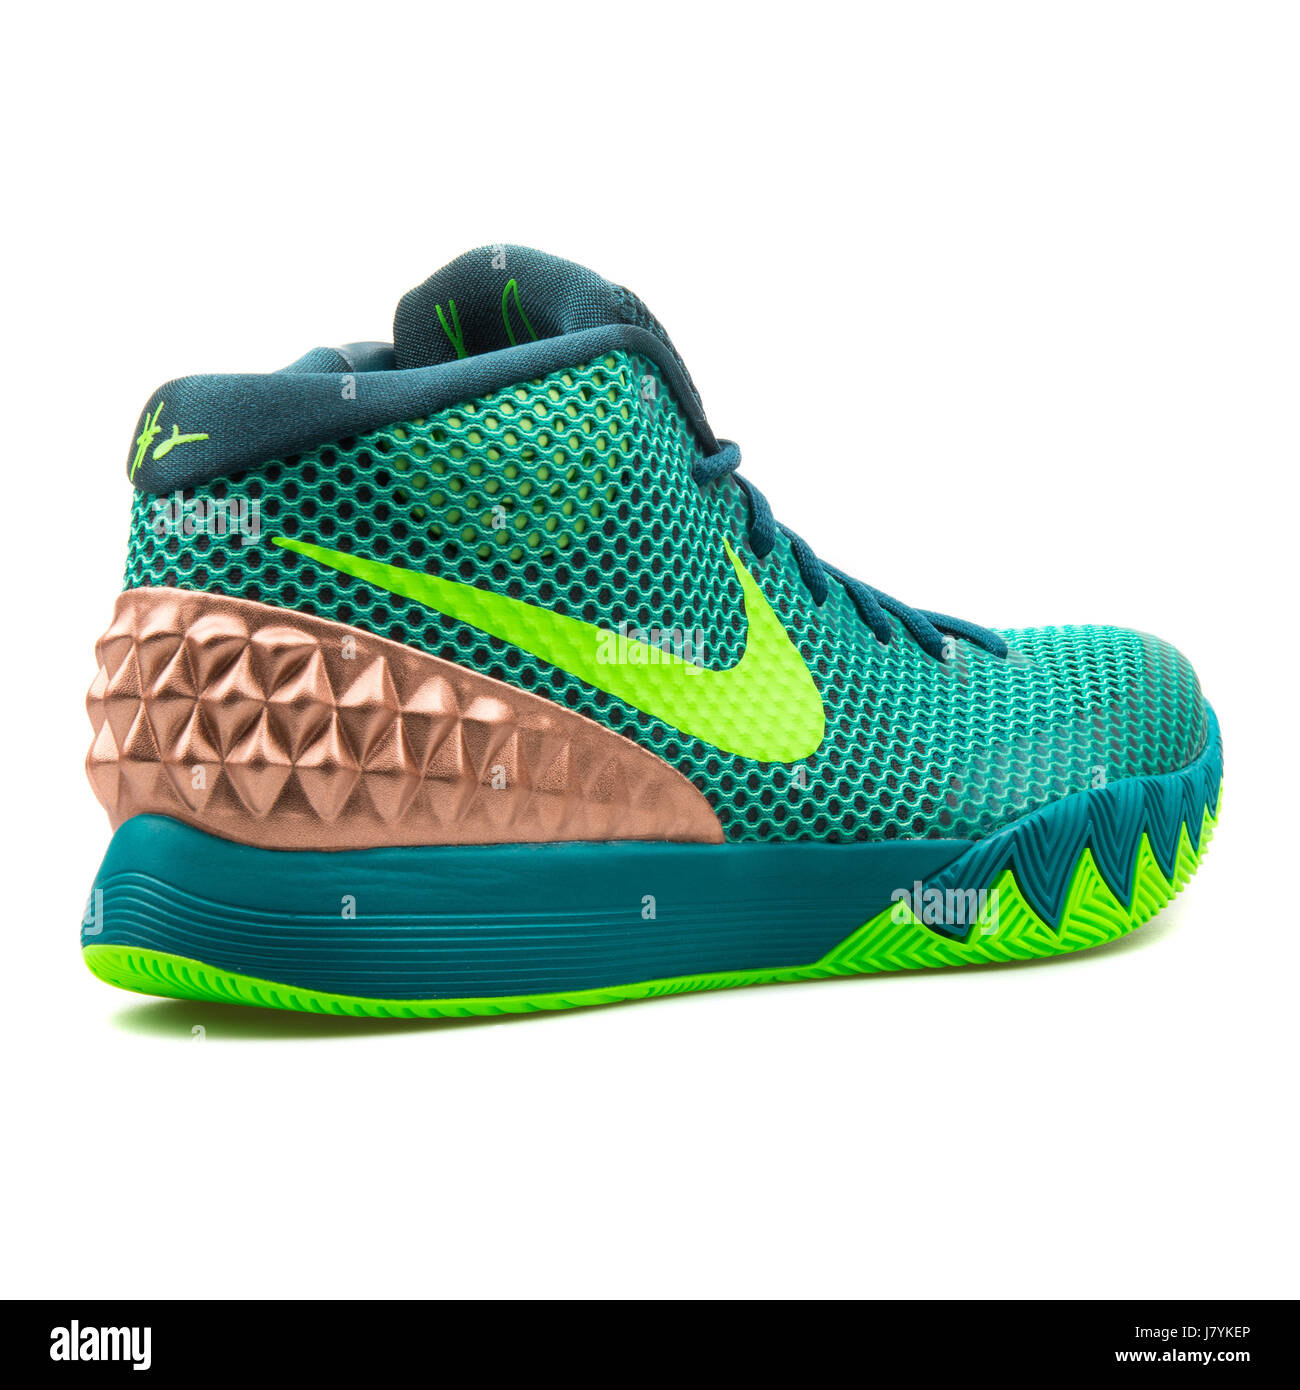 kyrie 1 mens shoes